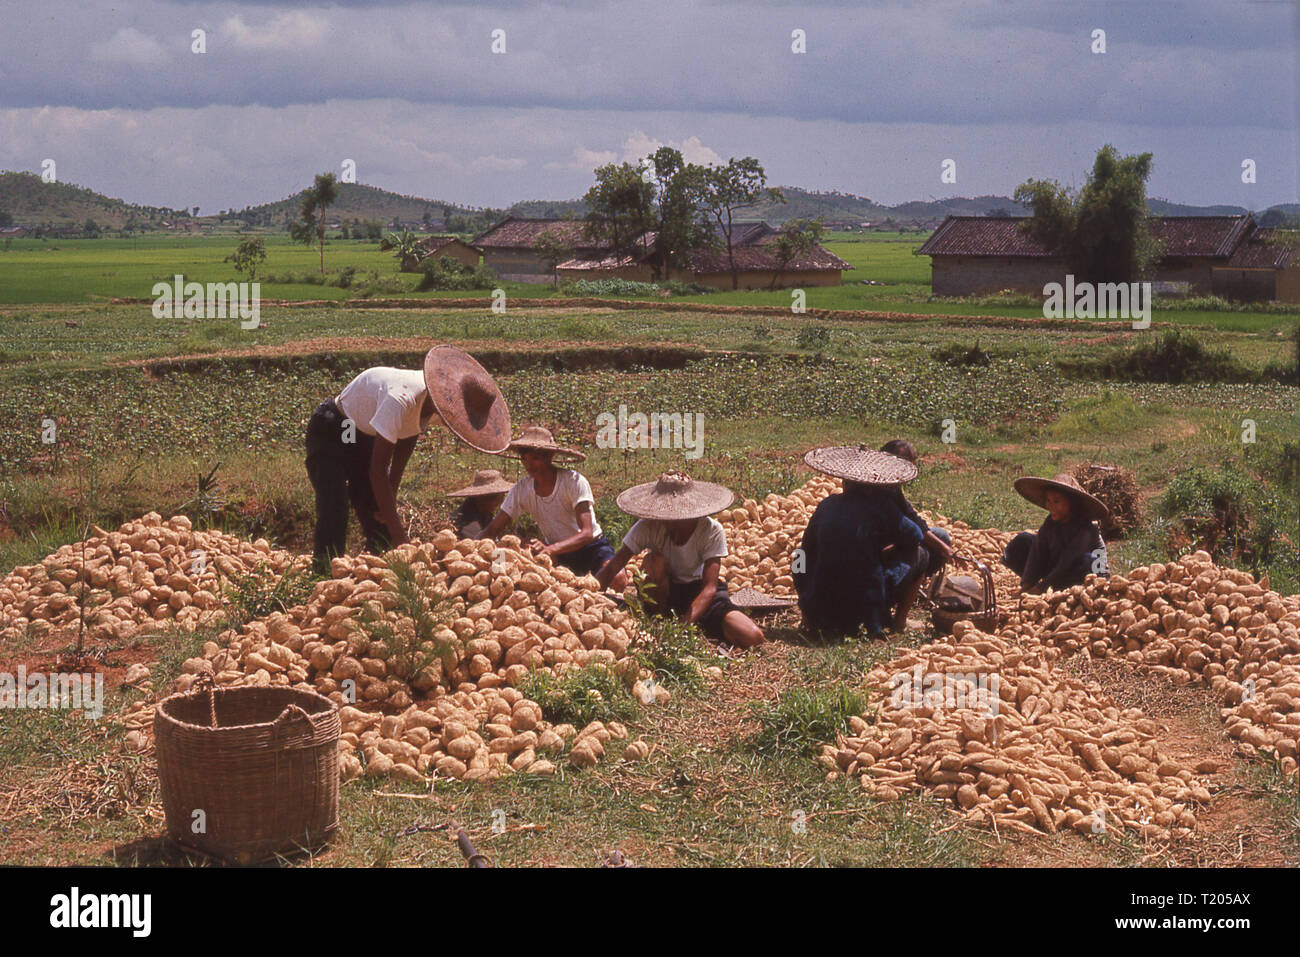 1960s, chinese workers wearing straw coolie or bamboo hats outside in a field sorting a crop of yams or sweet potatoes, a root vegetable which is a native crop to Asia. Stock Photo